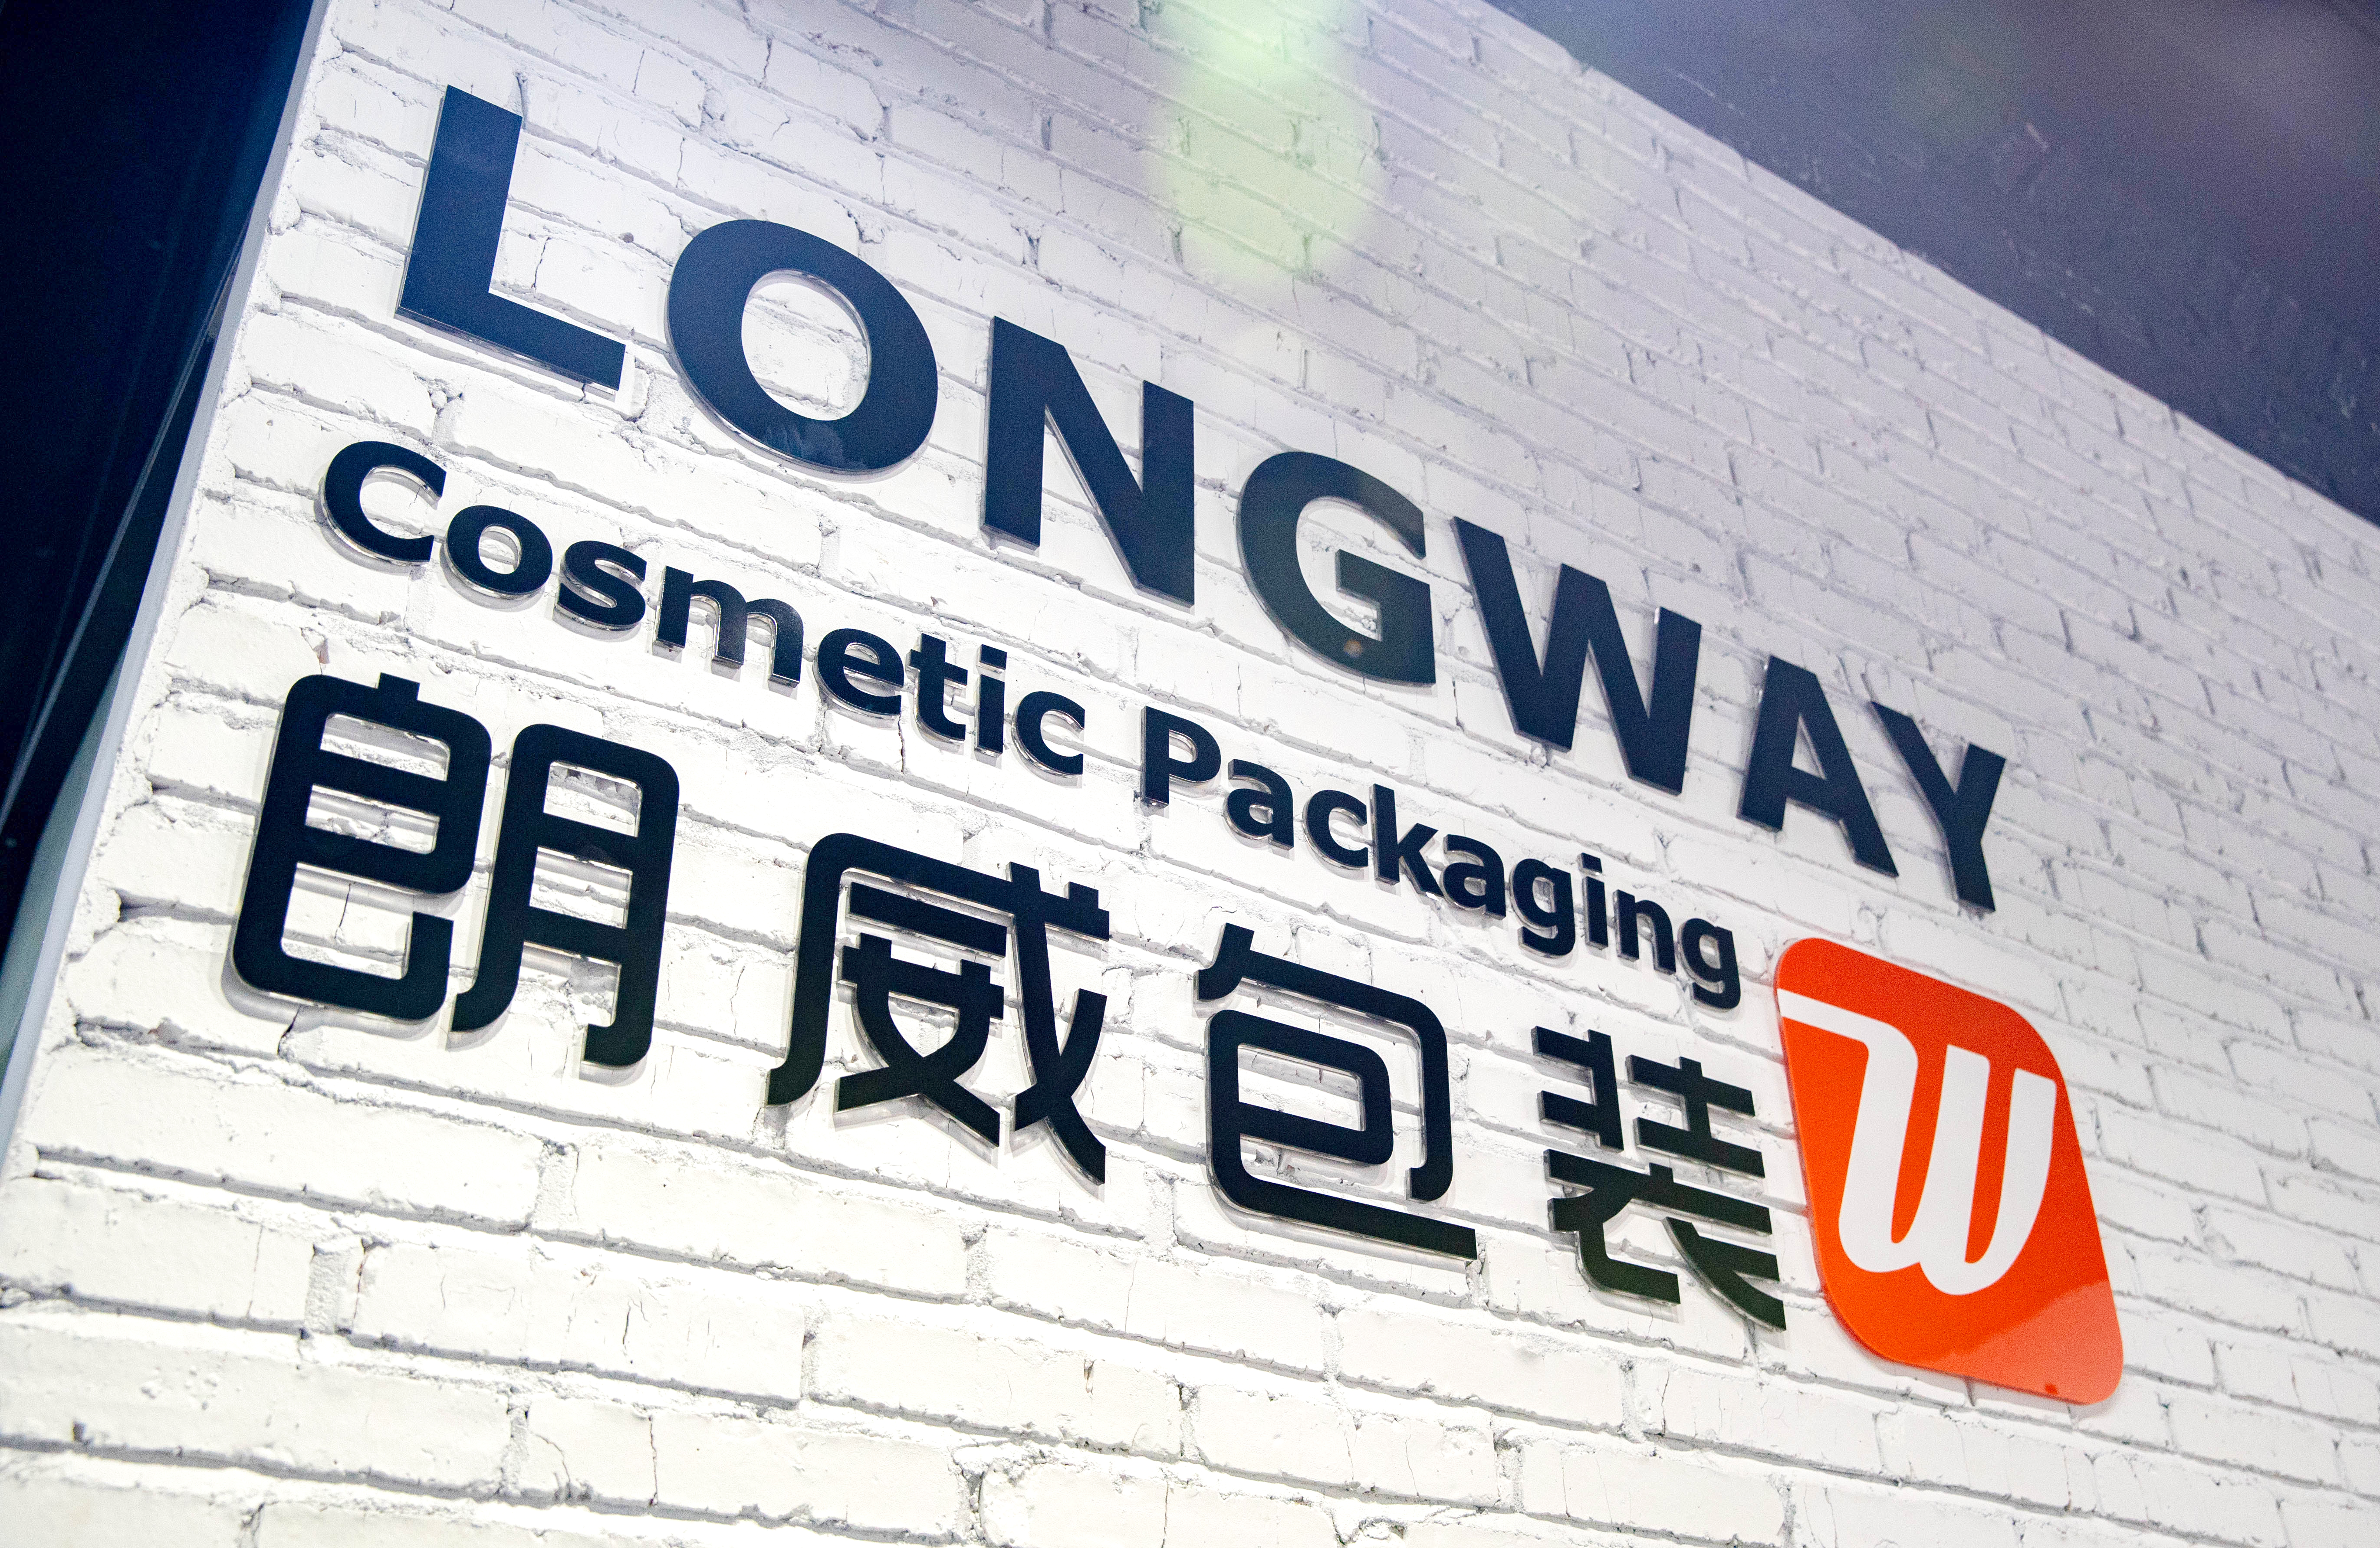 Online sales of cosmetics in China rose 26% in the first half of the year